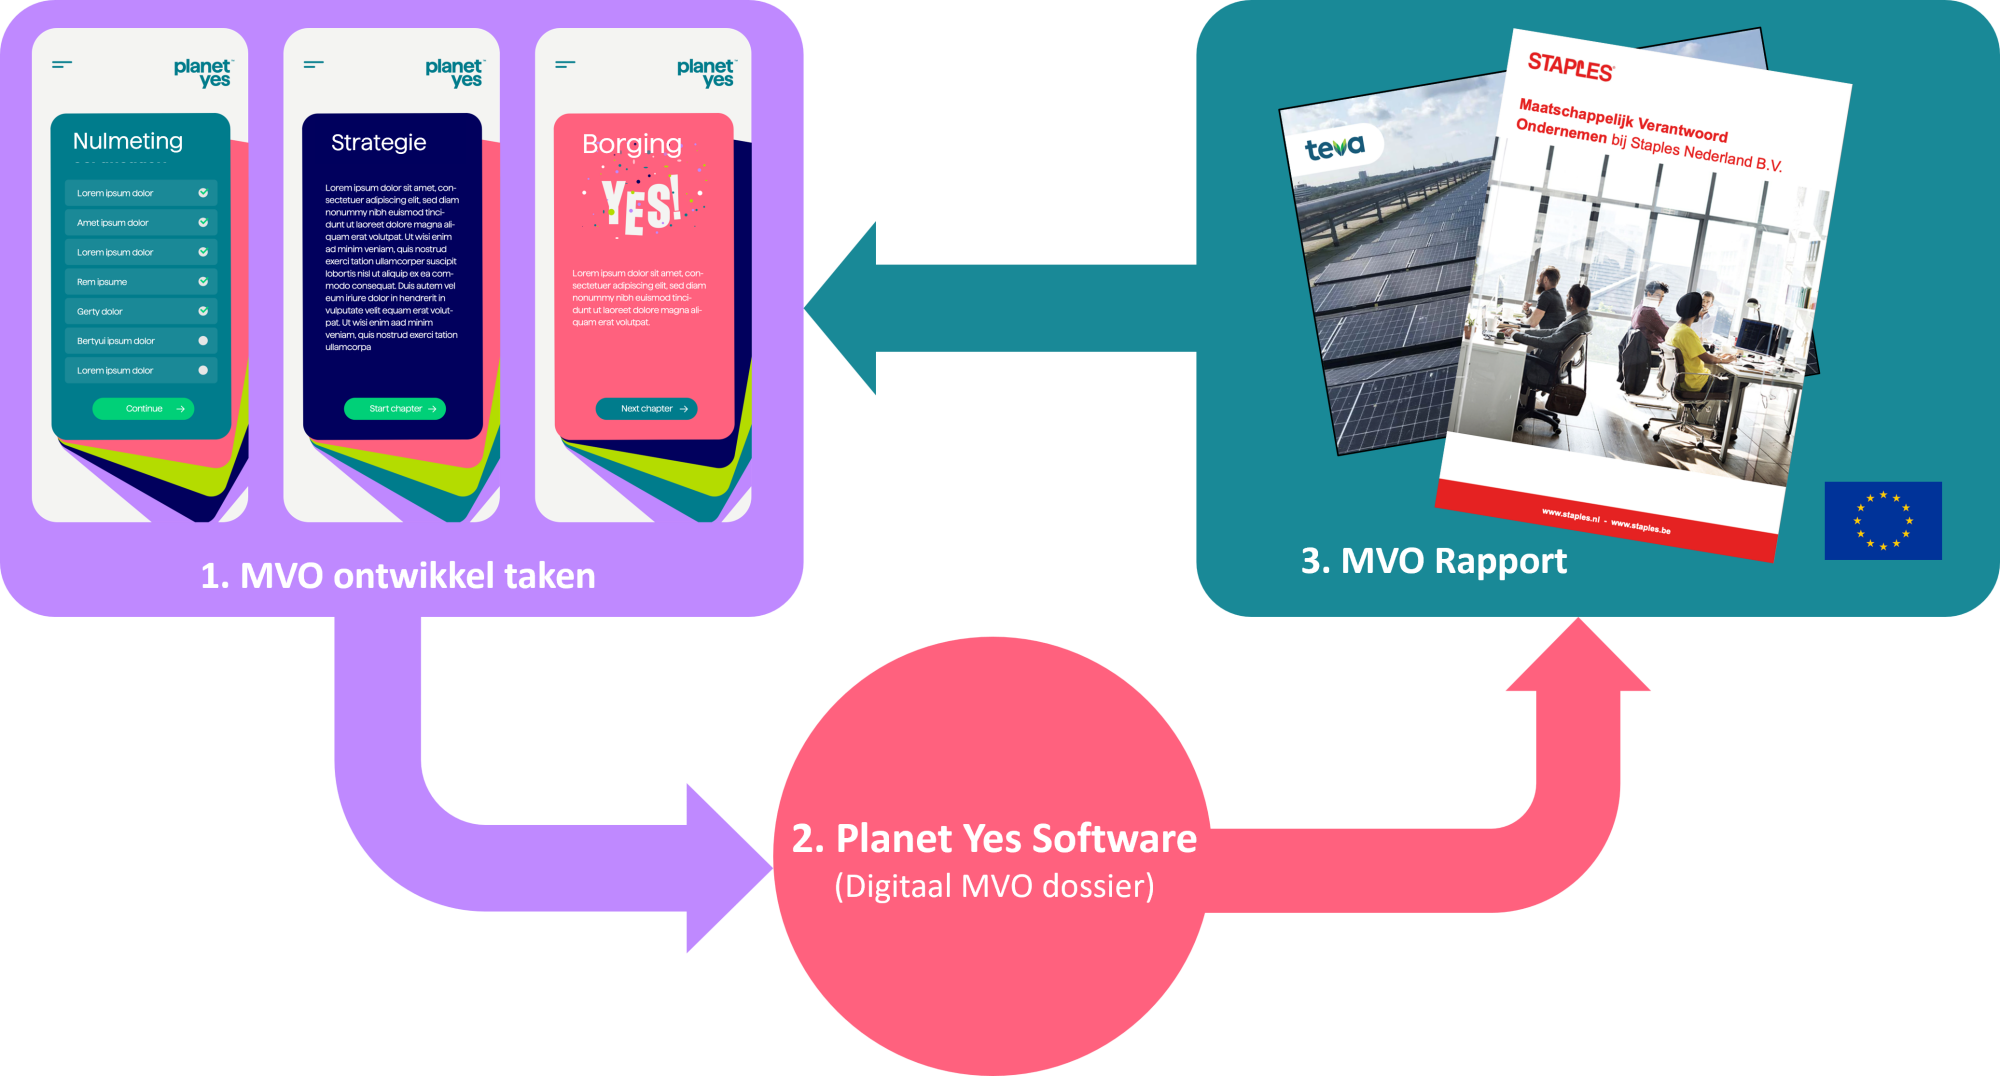 Planet Yes tools